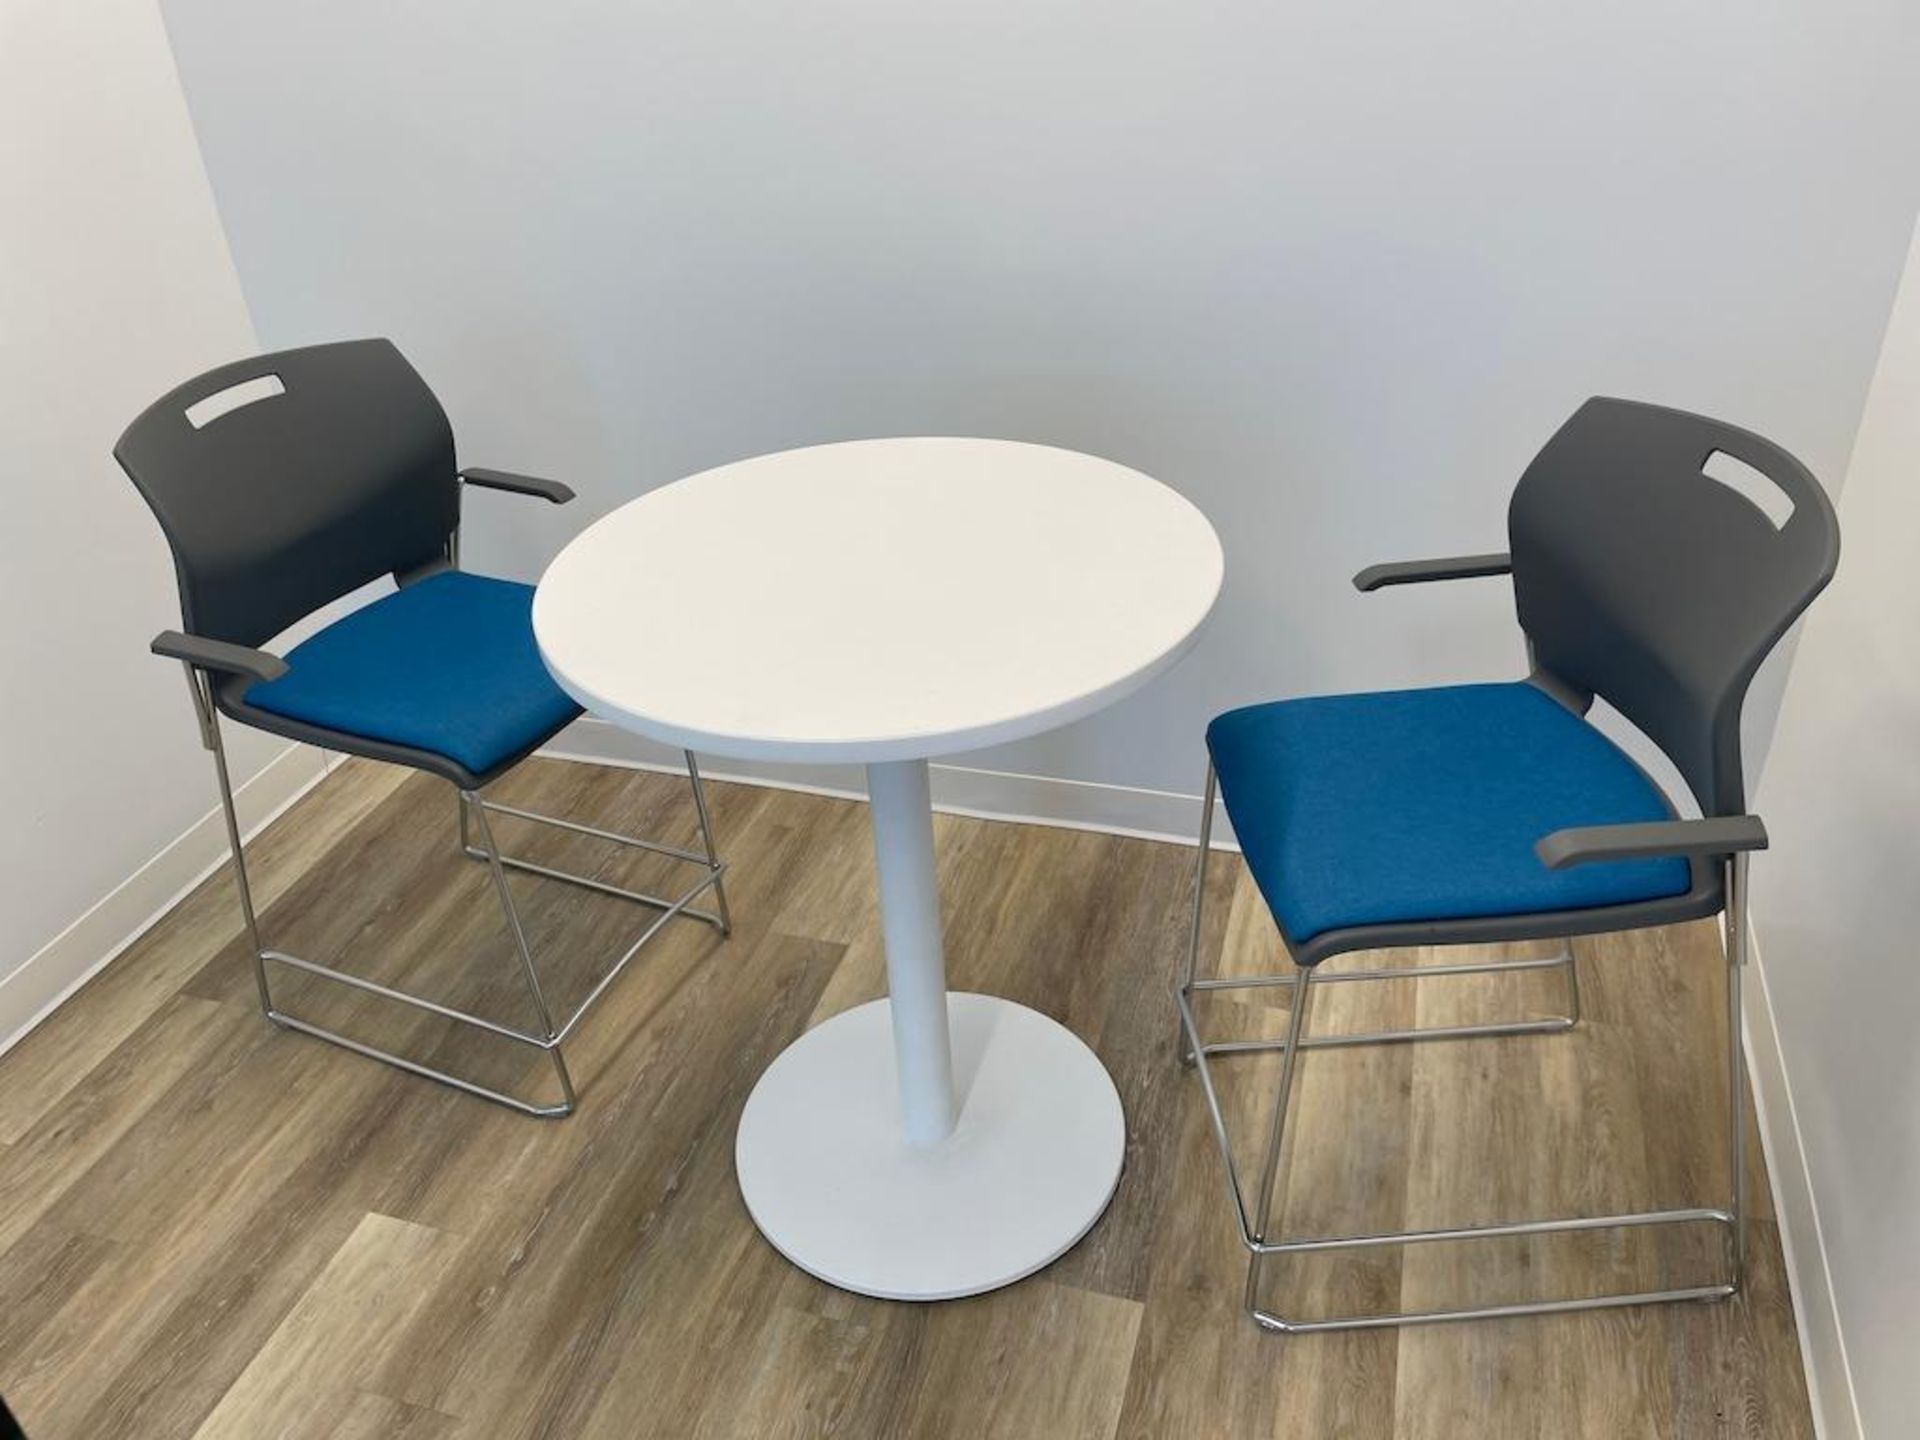 LOT (2) HIGH TOP 2.5 FT DIA ROUND TABLES, (4) HIGH STOOLS [2ND FL OFFICE] - Image 2 of 2